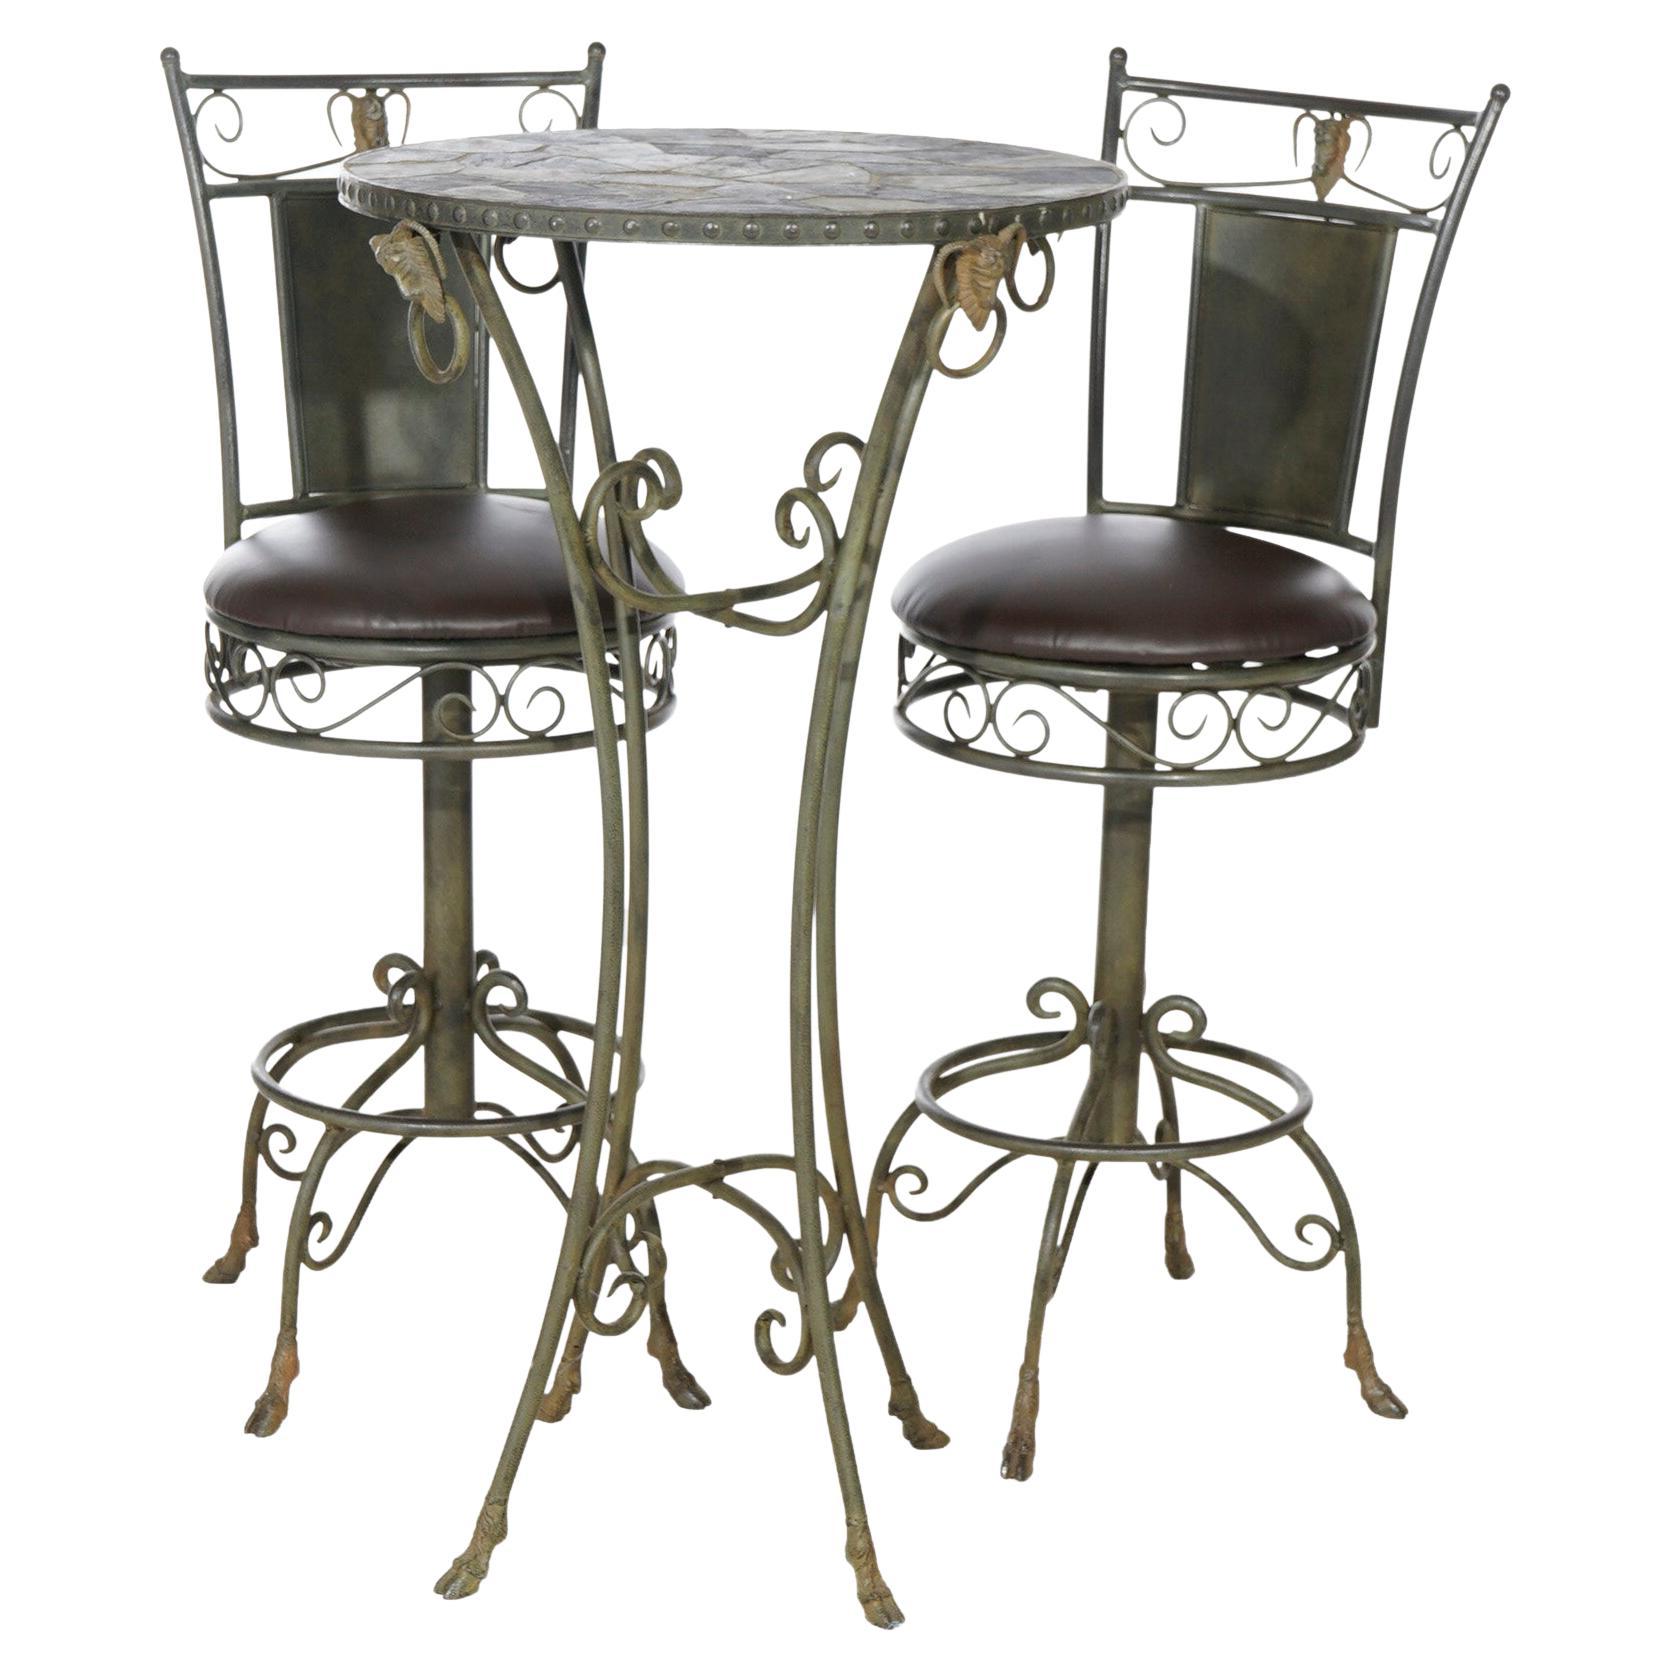 Figural Wrought Iron & Slate Pub Table & Chairs with Satyr Heads & Hoof Feet